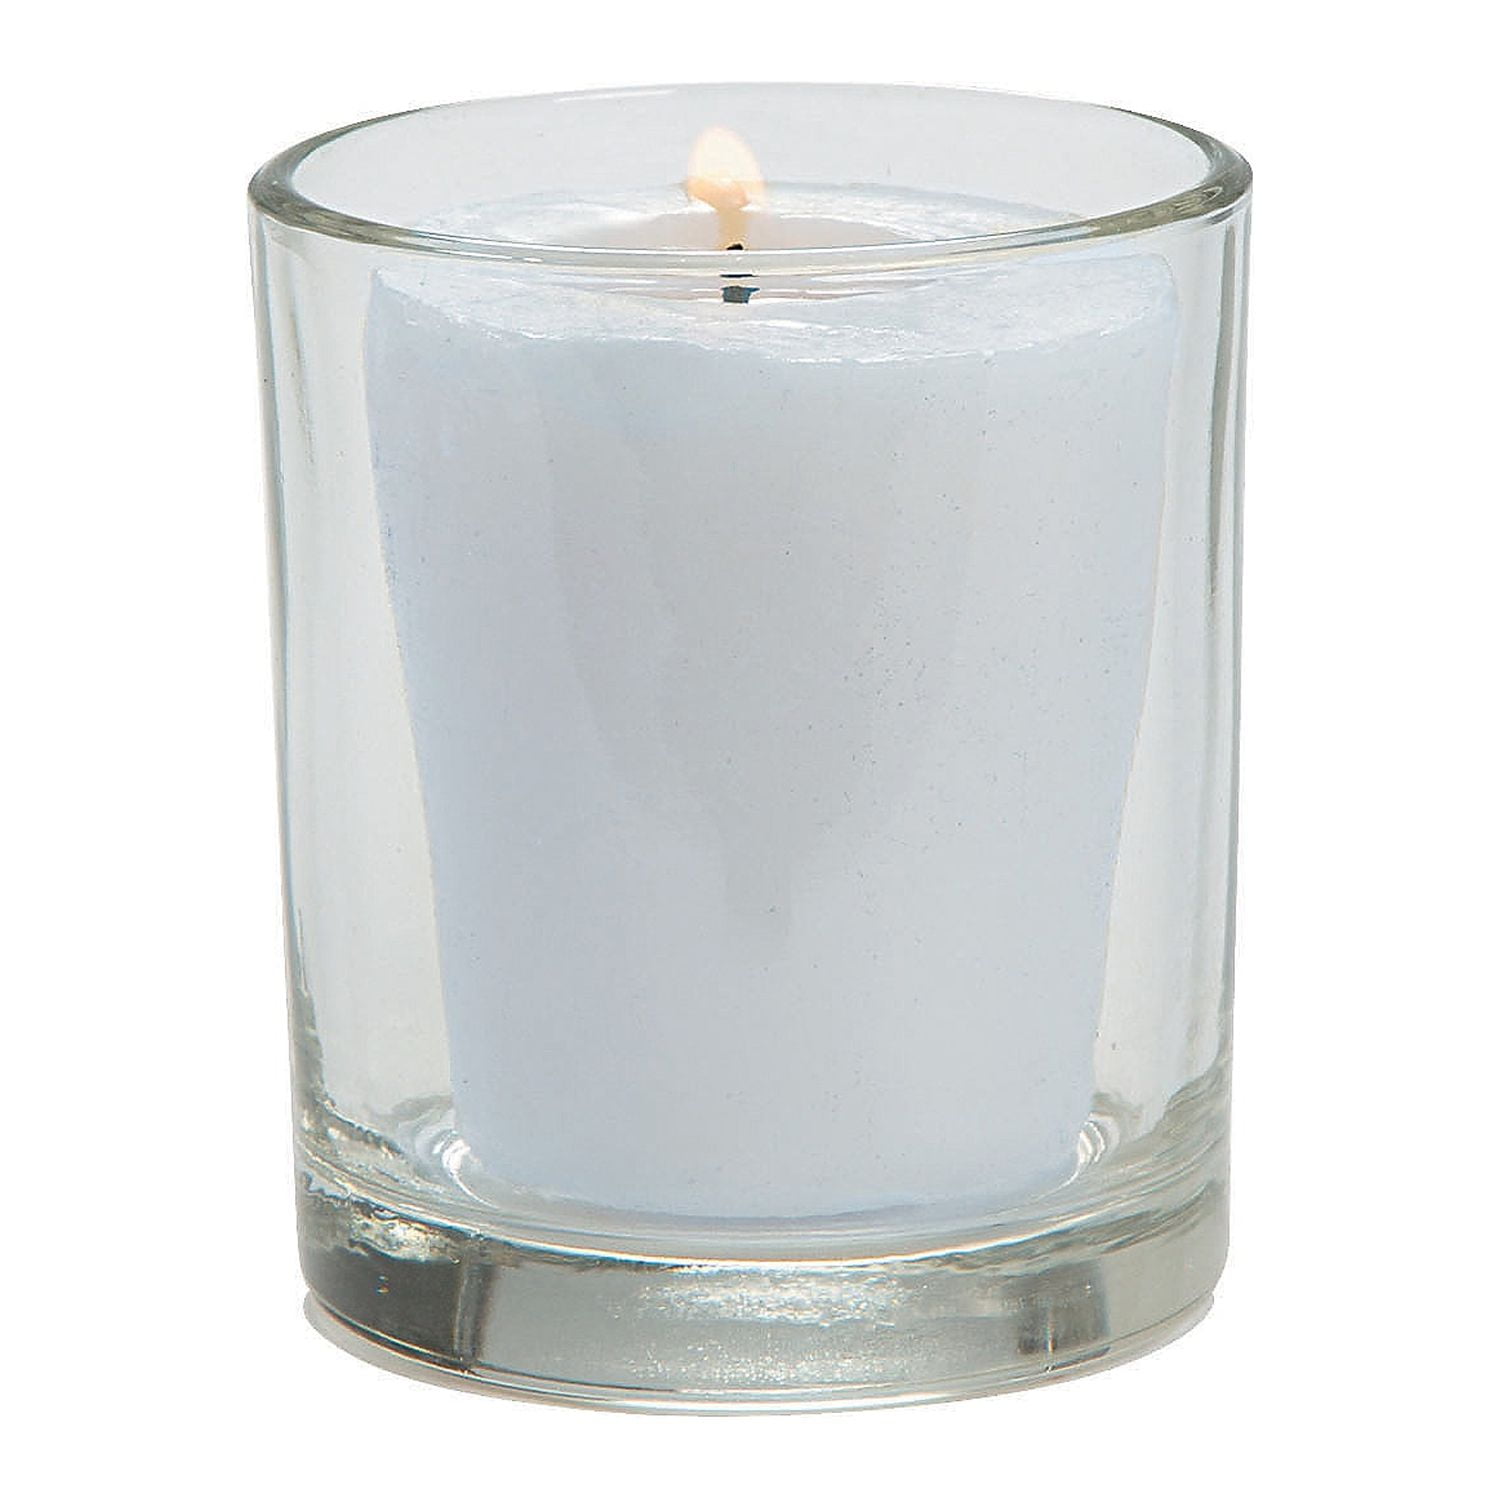 15.5 oz Frosted white candle jars - Set of 12 pcs